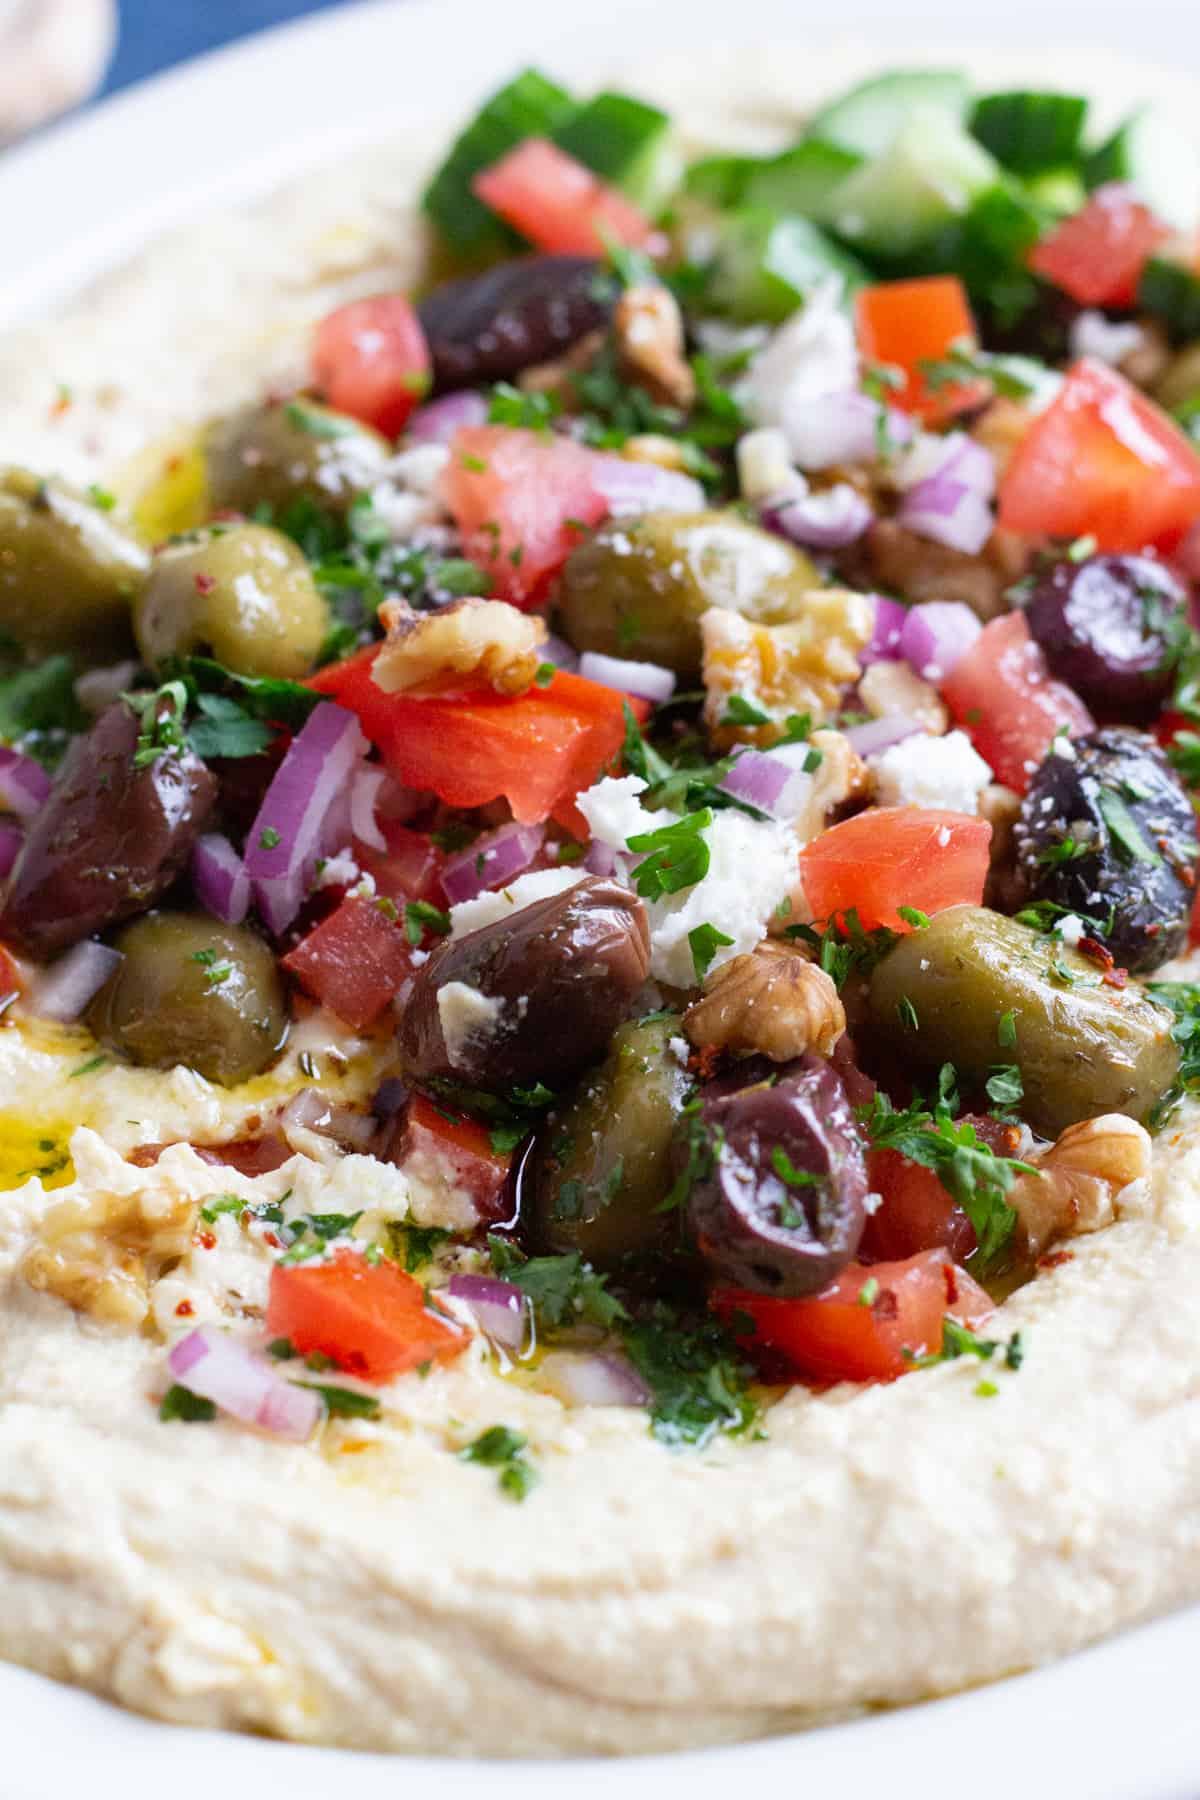 This loaded hummus recipe with all the fixings is ready in 15 minutes! Creamy hummus is topped with delicious toppings and served with pita!